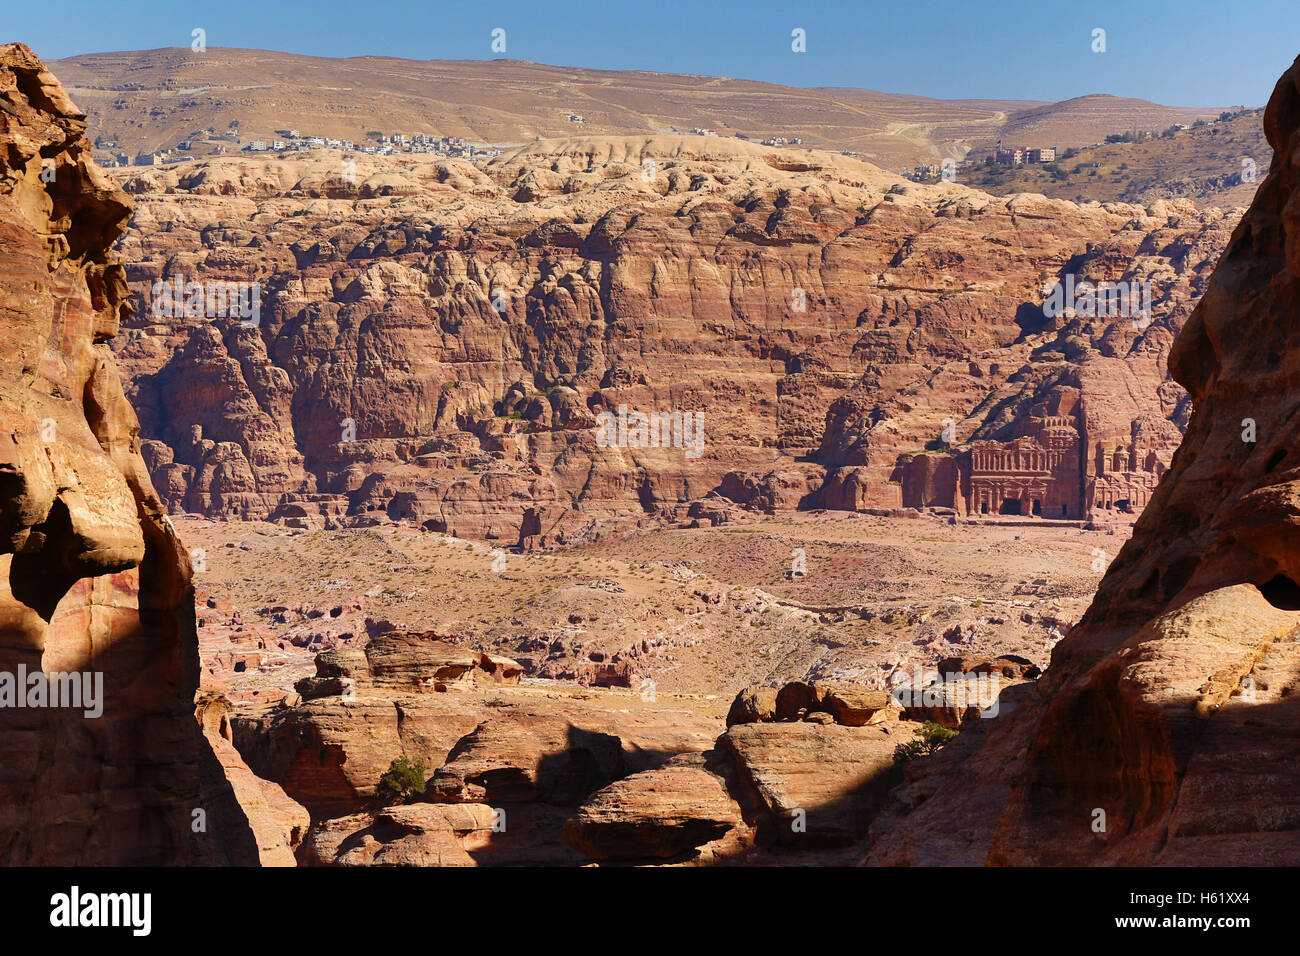 Tombs in sandstone rocks around the valley in the rock city of Petra, Jordan Stock Photo